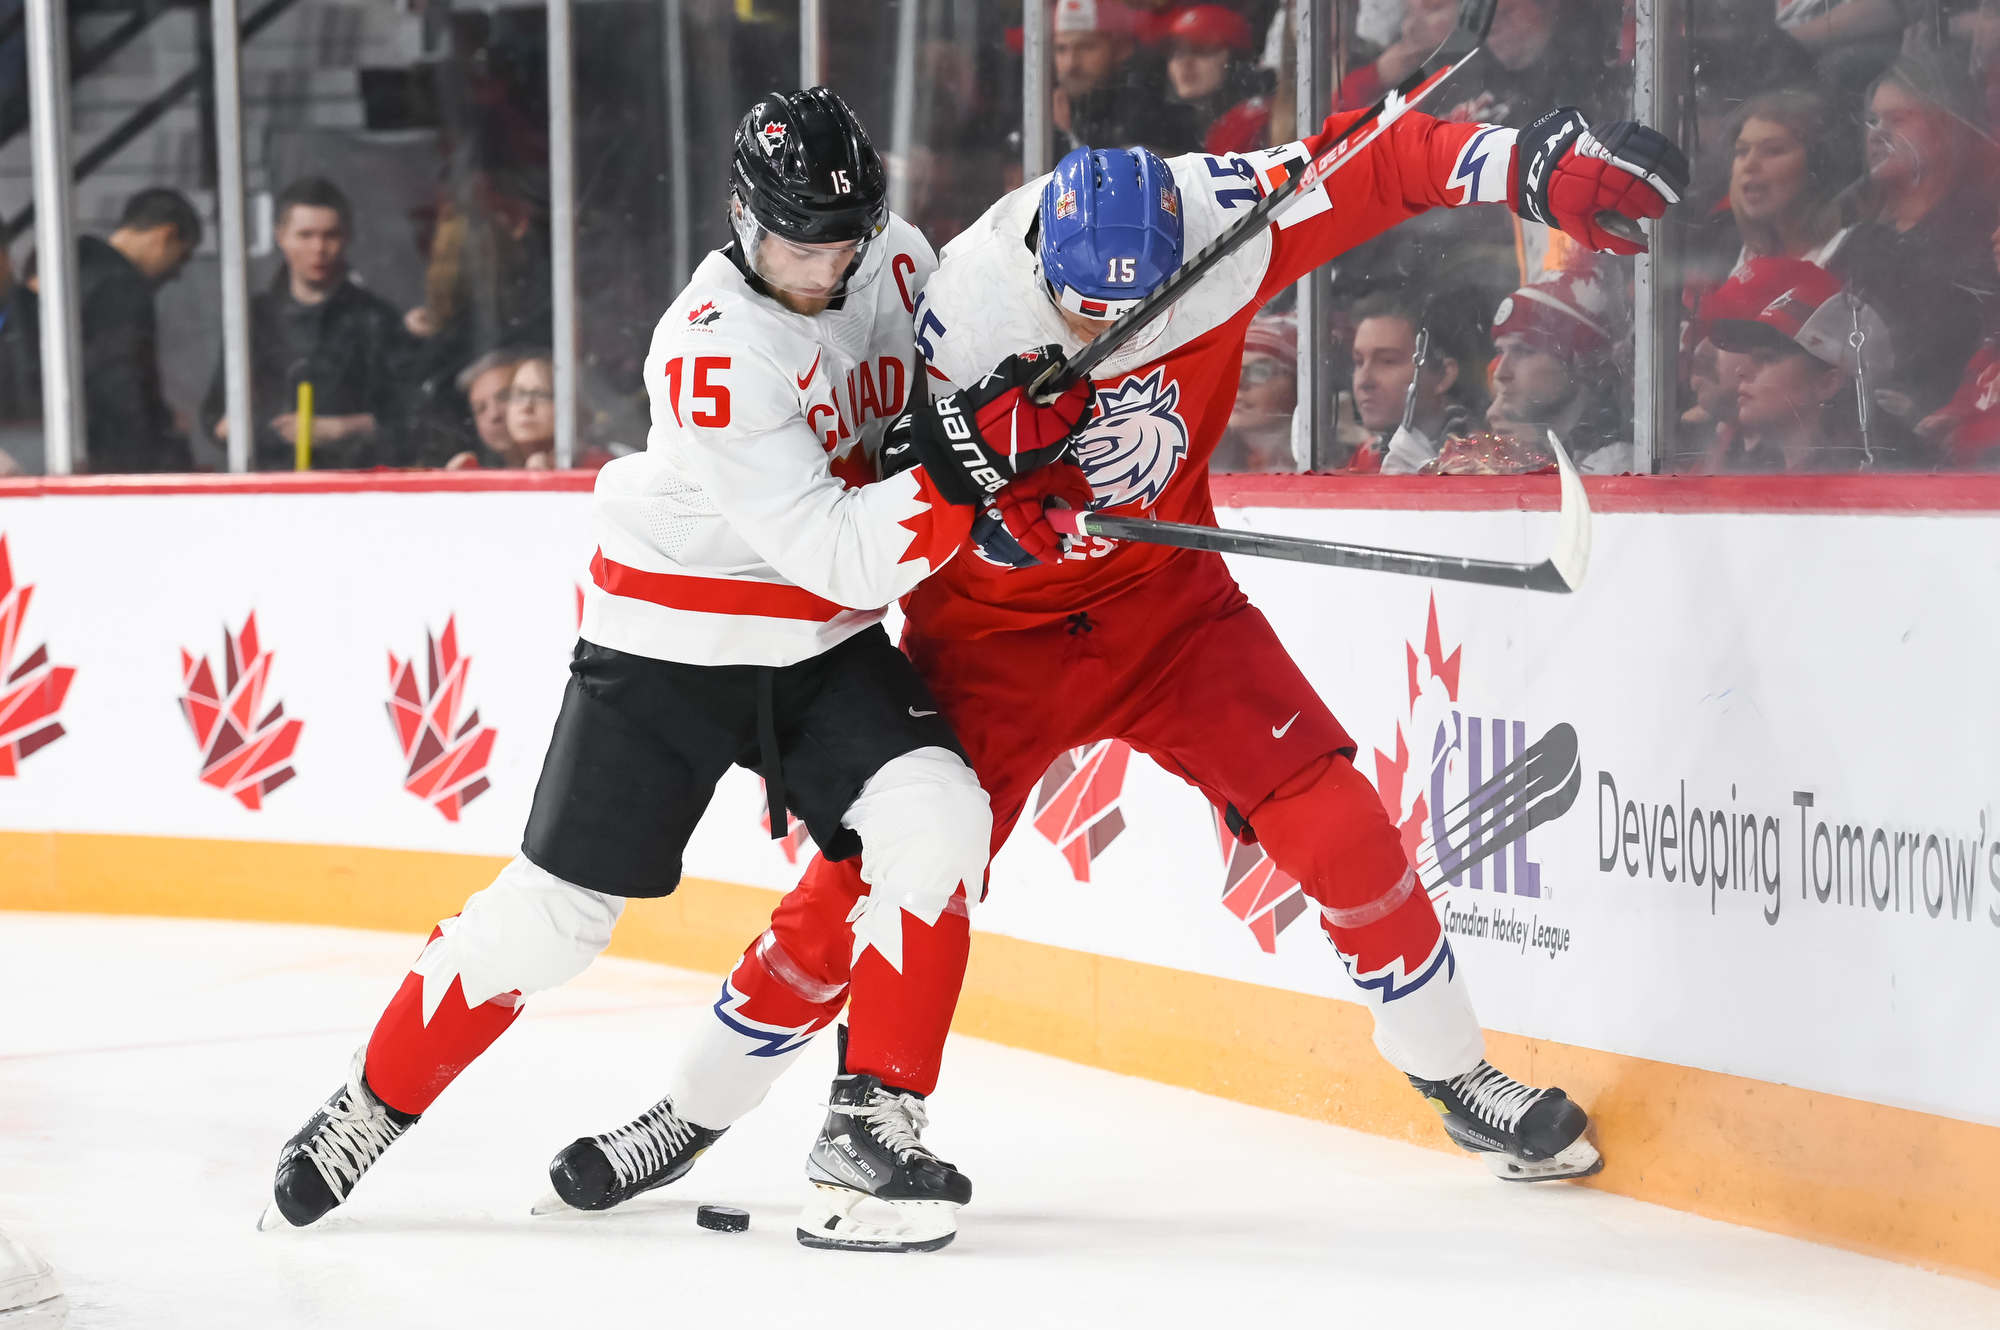 Hockey Night in Canada on X: WHAT A GAME, WHAT A FINISH 👏 Dylan Guenther  with with the golden goal for Canada at the 2023 #WorldJuniors 🇨🇦🥇   / X